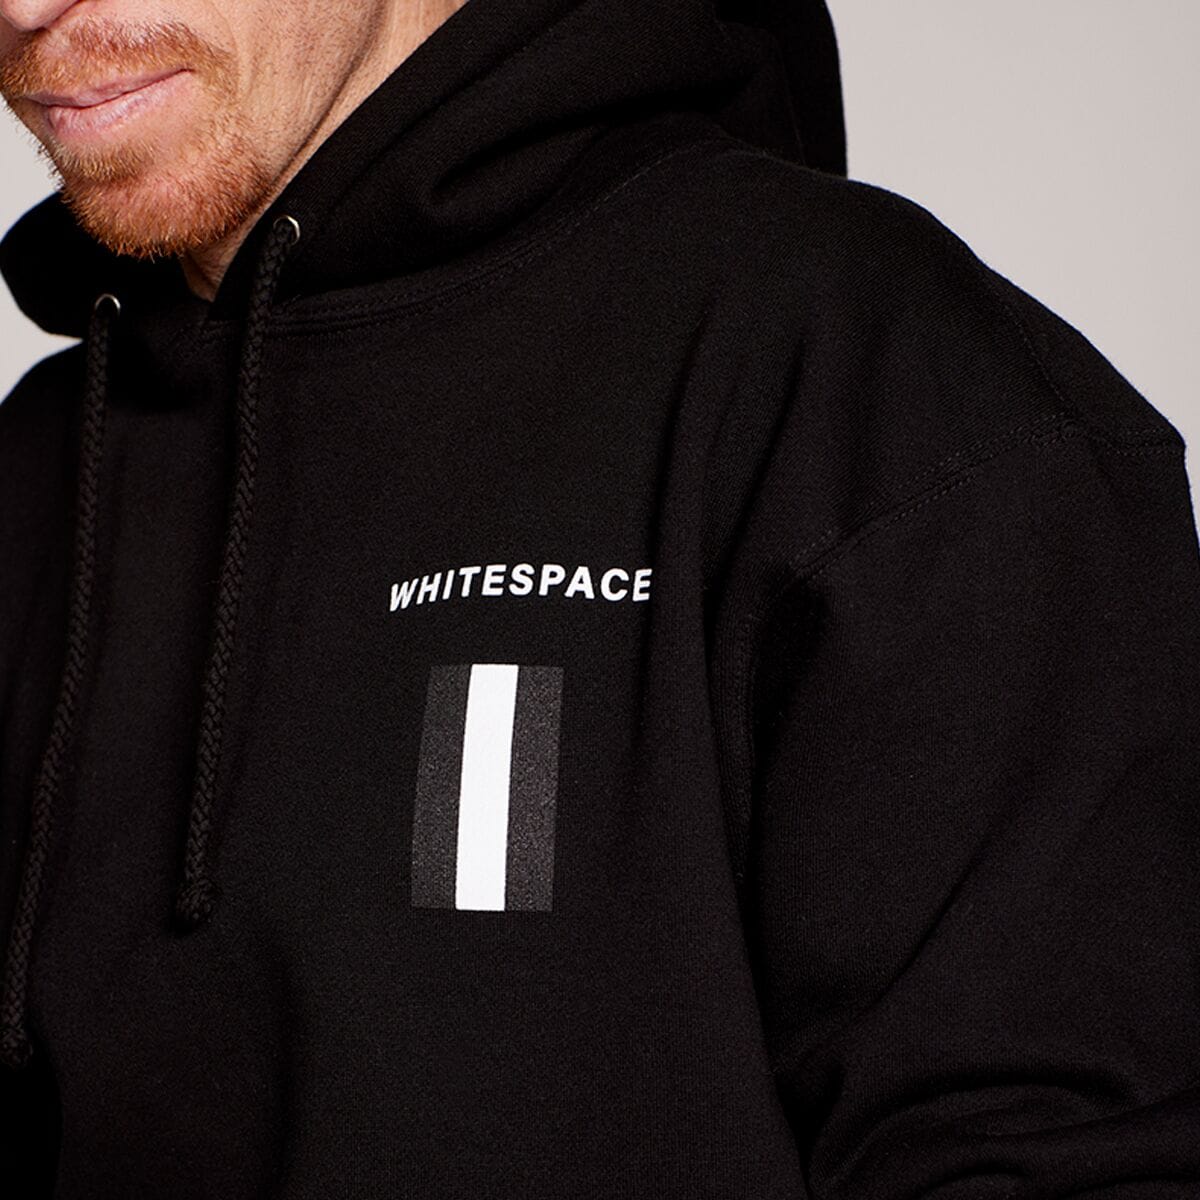 WHITESPACE, Backcountry.com in 2023